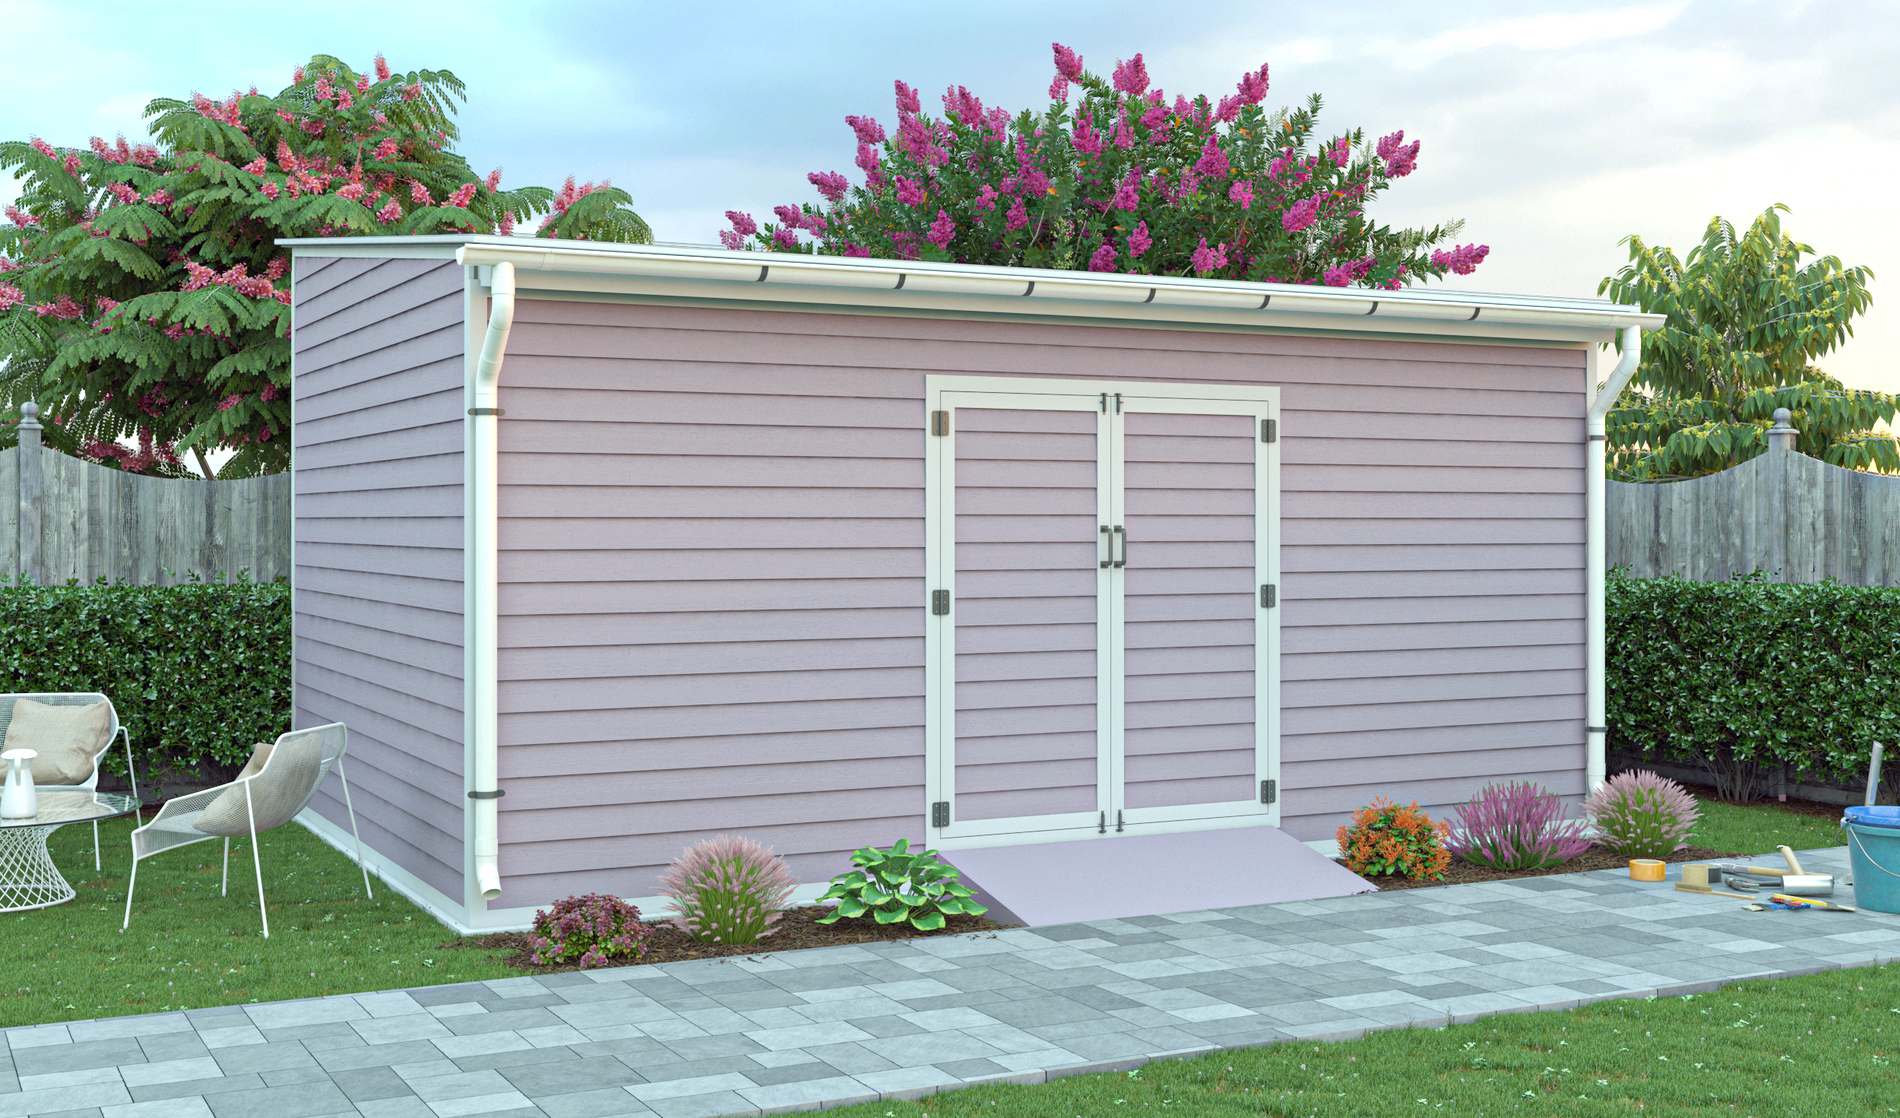 12x18 lean to storage shed preview